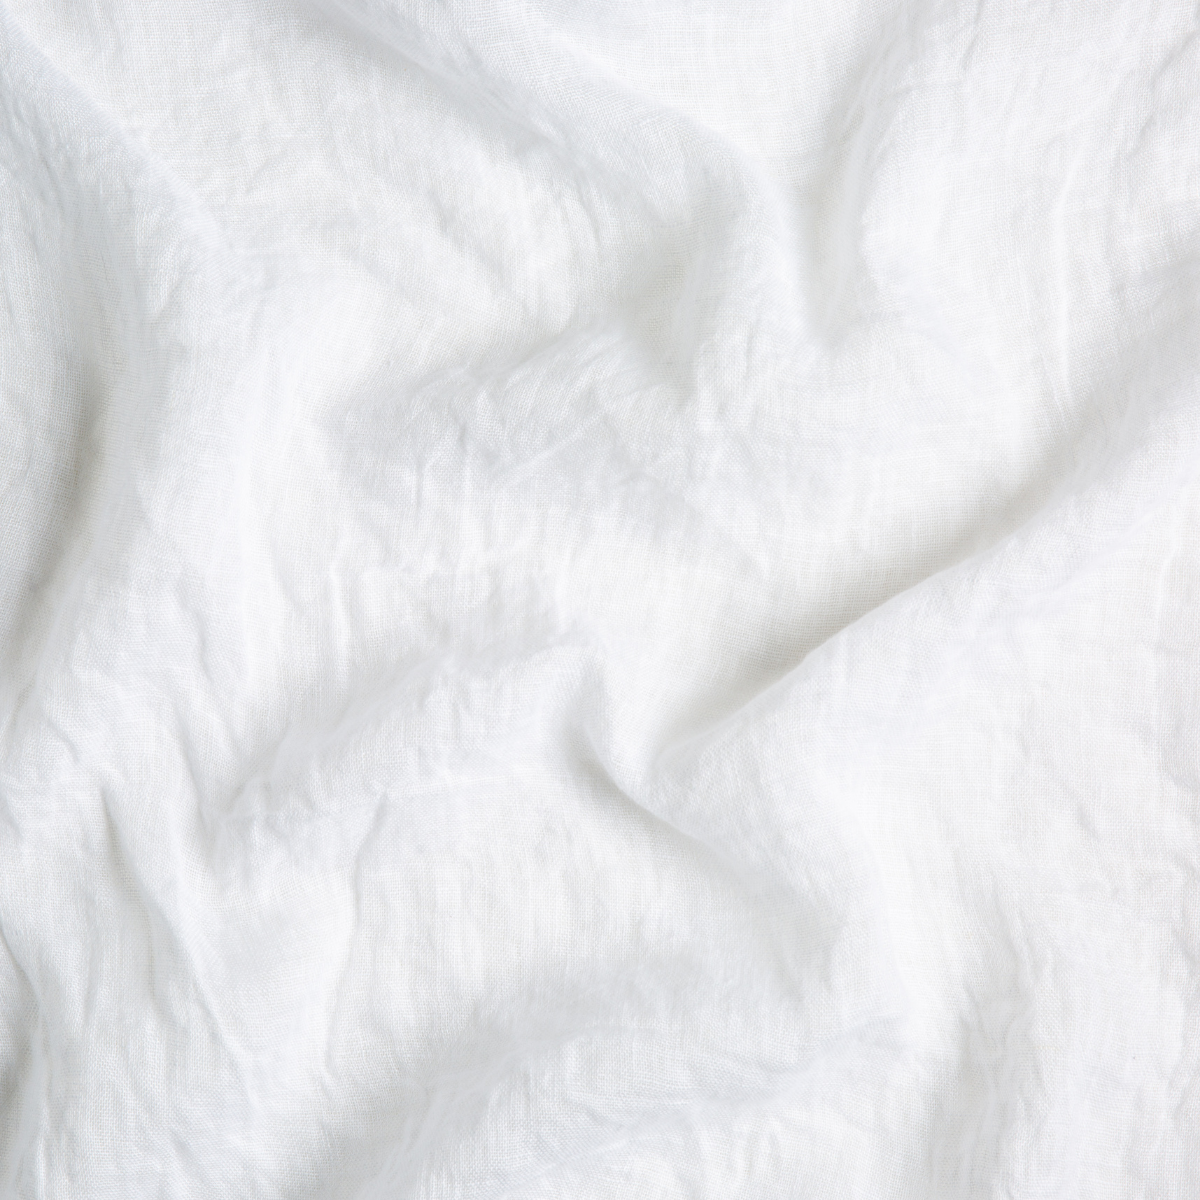 Cotton Gauze White 52 Inch Fabric by The Yard (FE®)